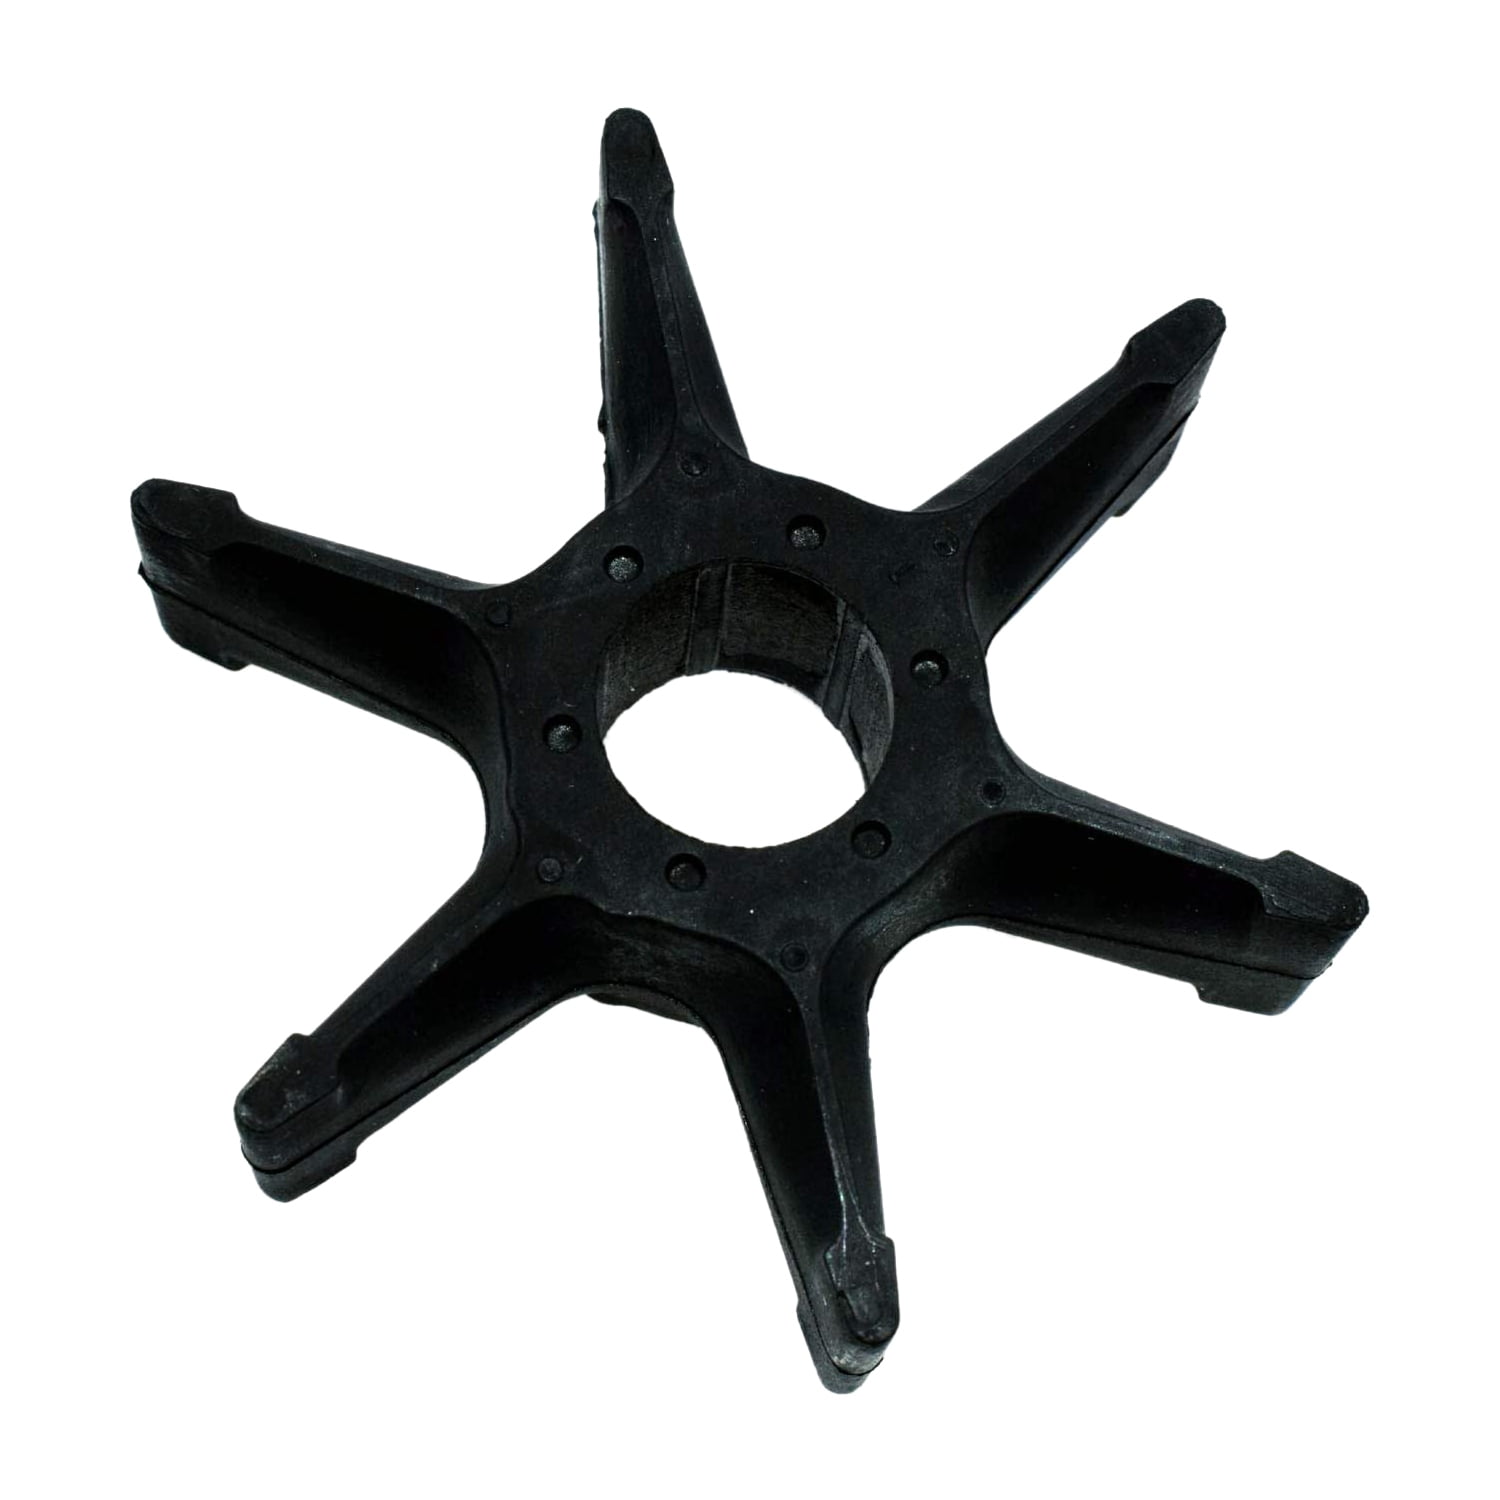 Water Pump Impeller 6F5-44352-00 6 Blades for Yamaha 40HP Outboard